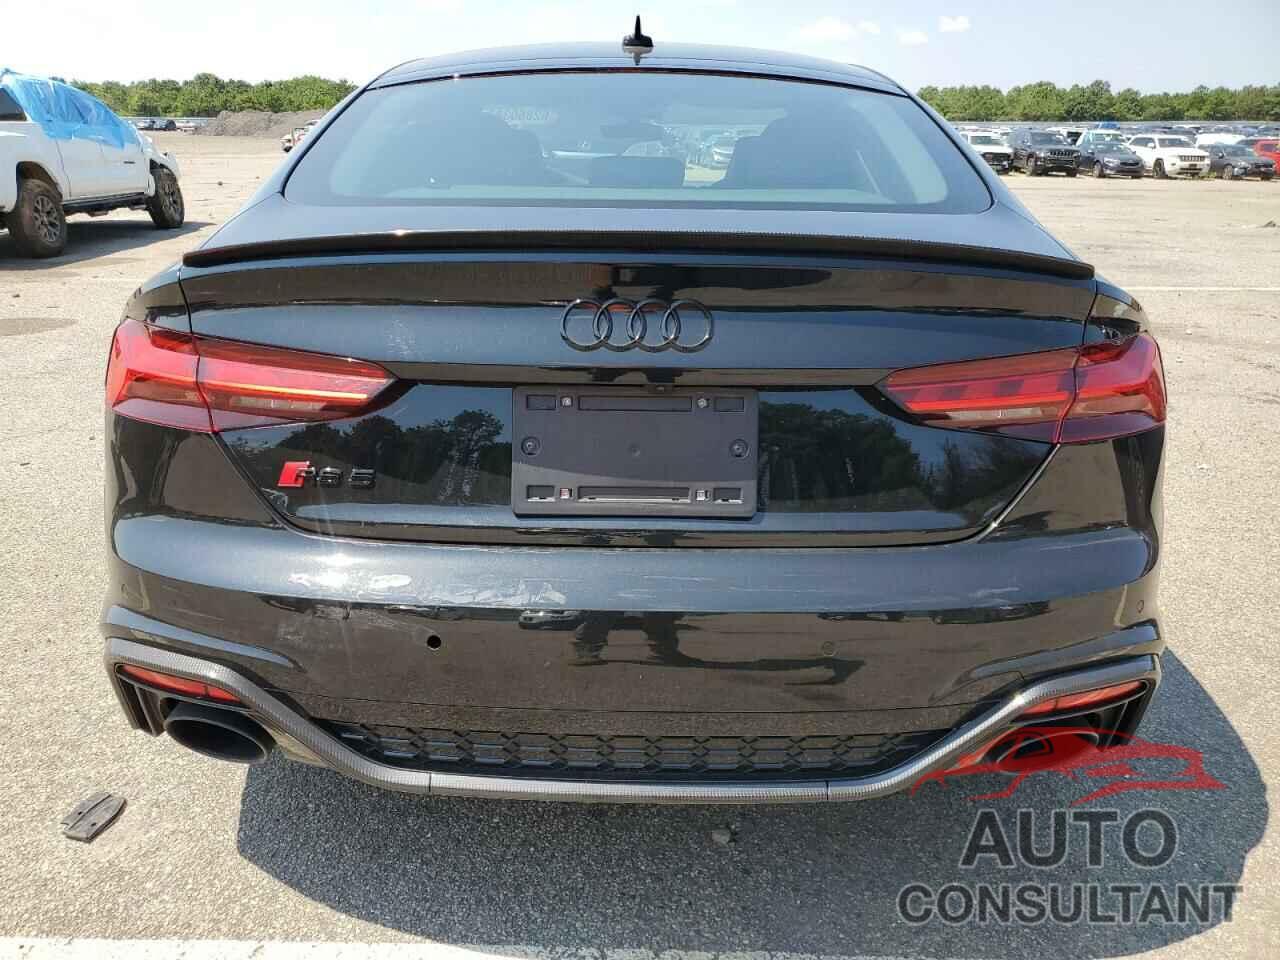 AUDI S5/RS5 2023 - WUAAWCF54PA900981